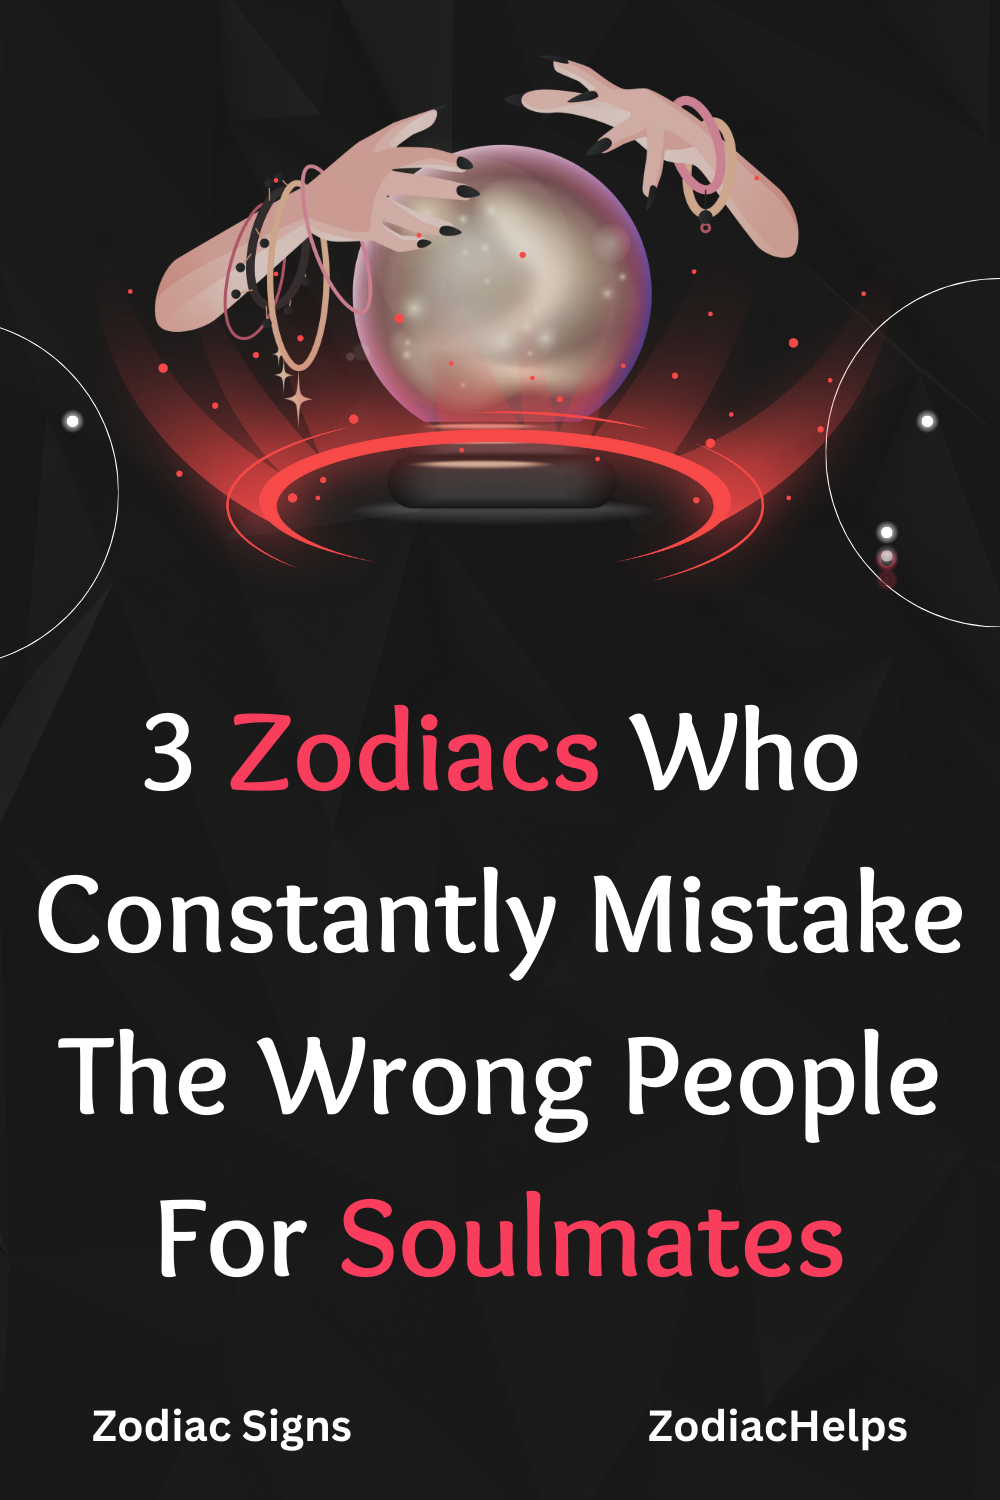 3 Zodiacs Who Constantly Mistake The Wrong People For Soulmates